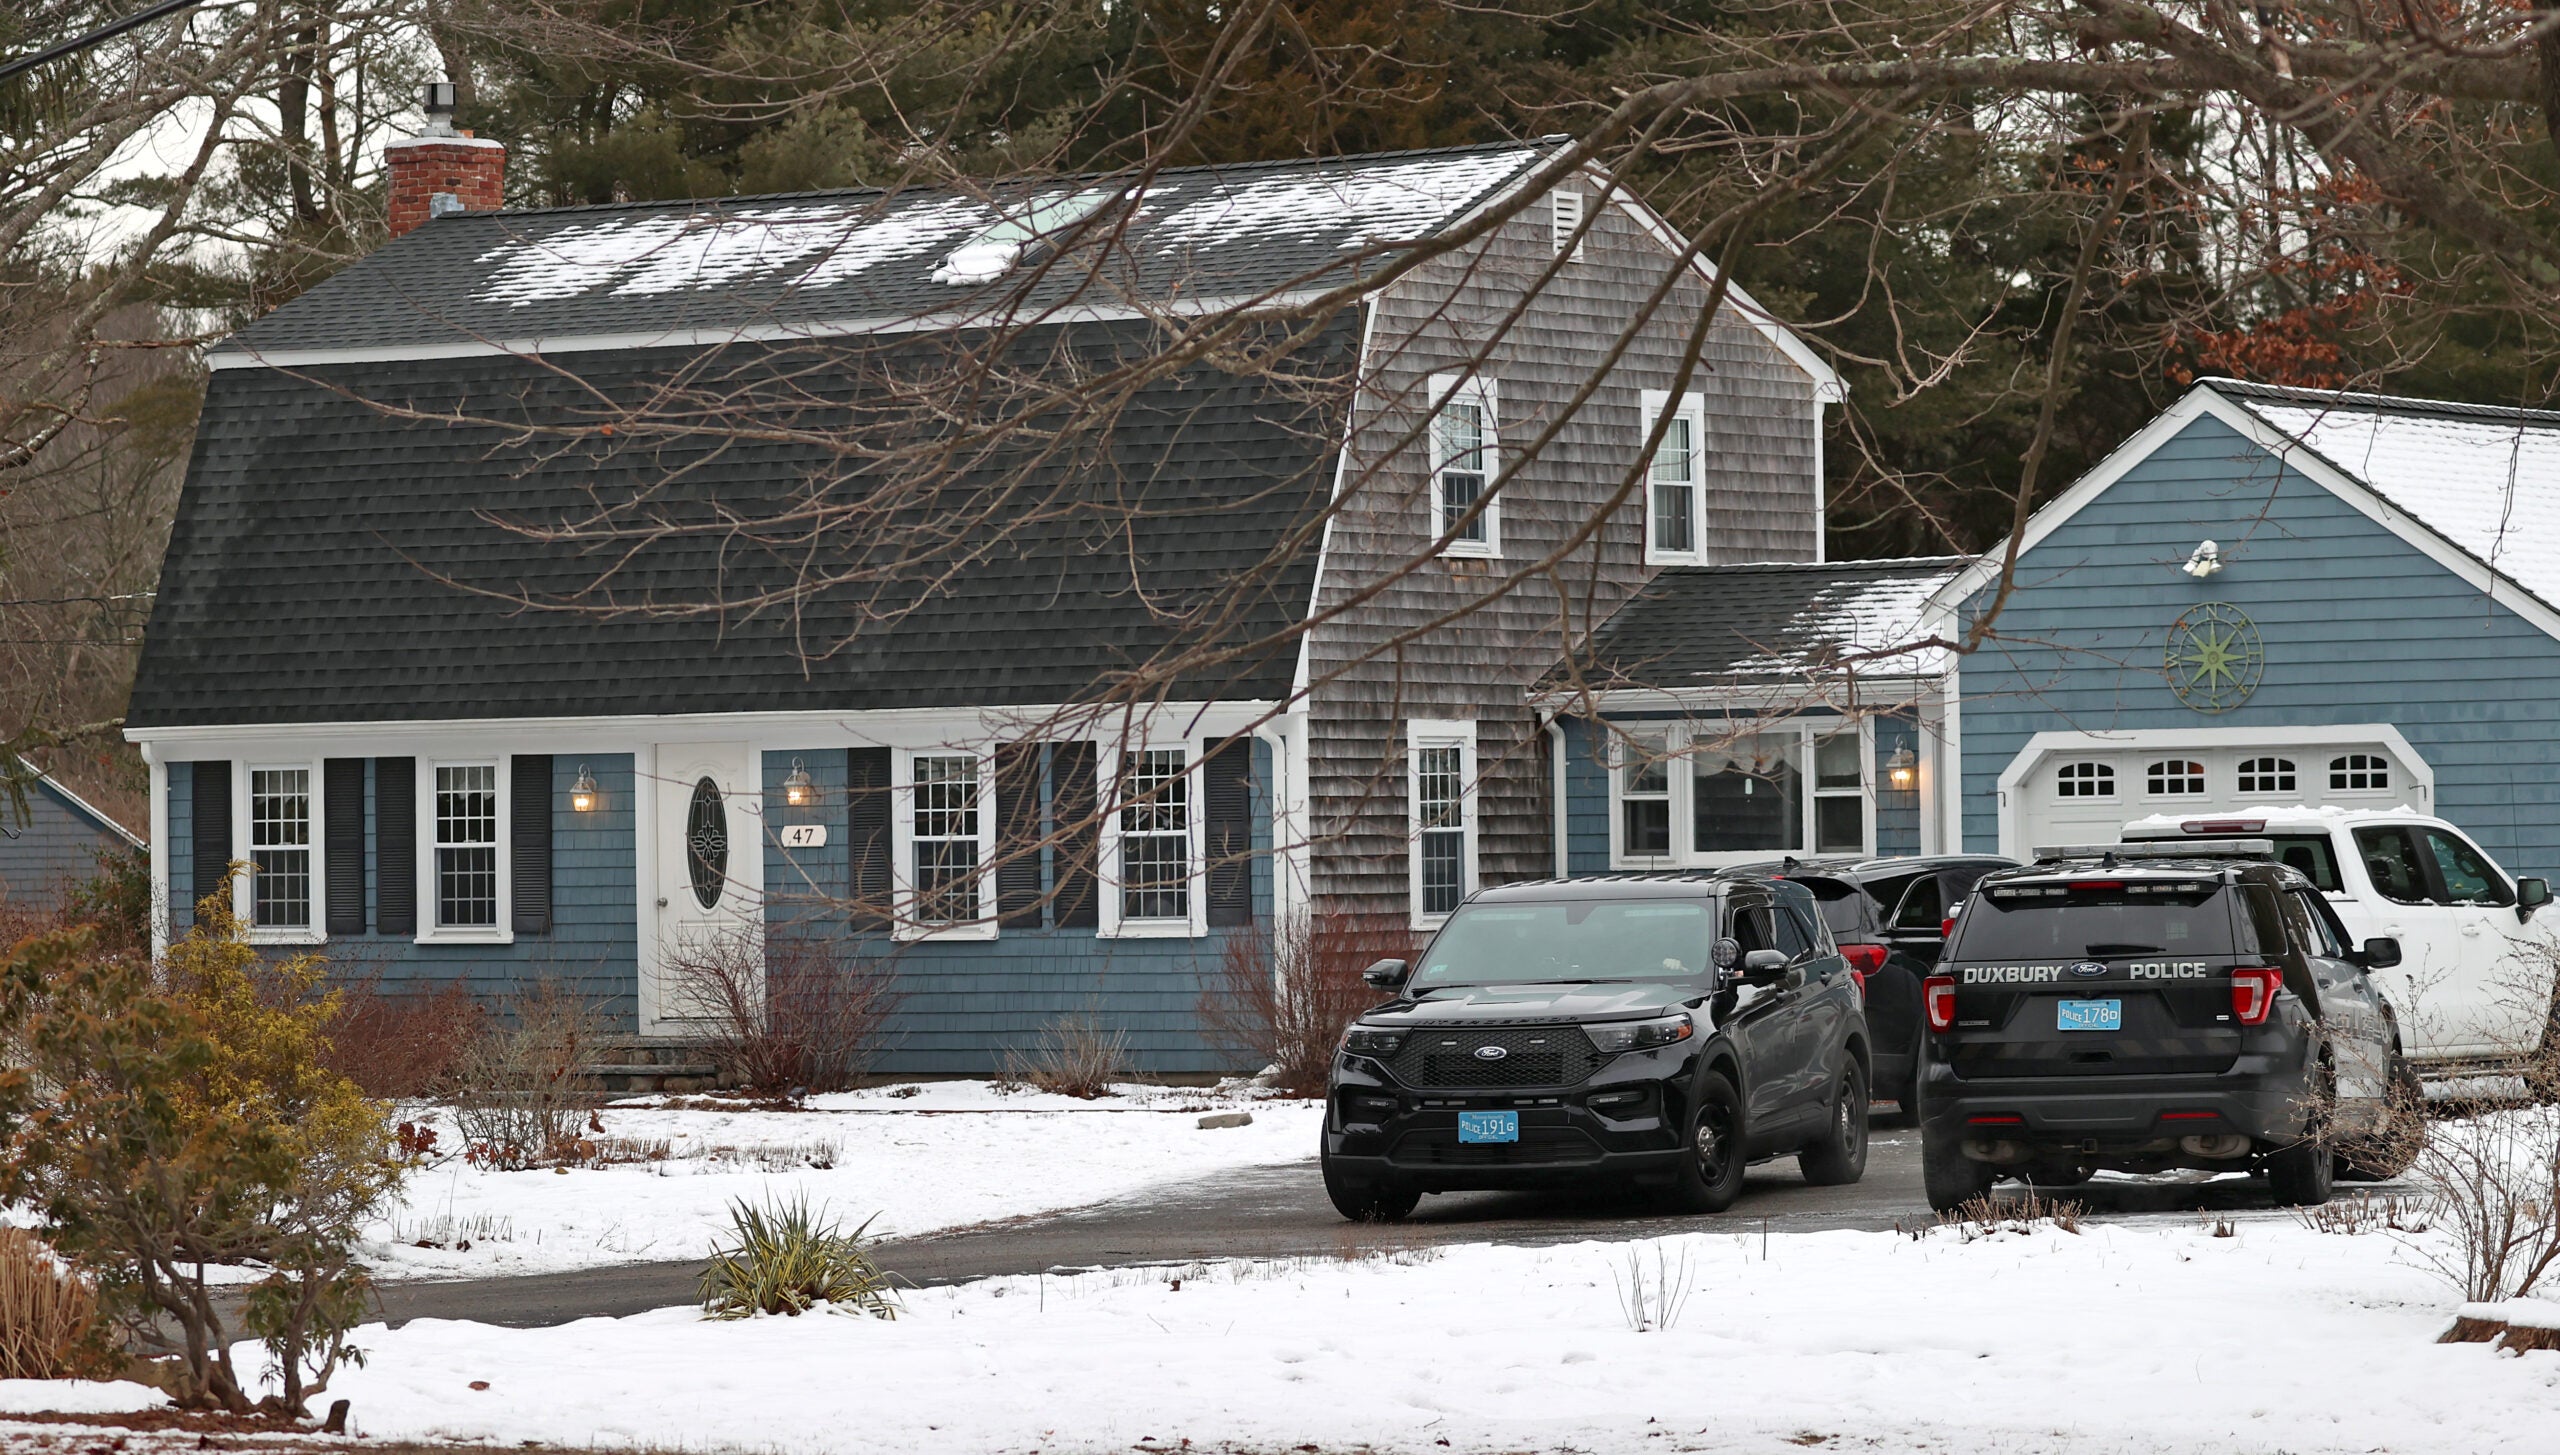 Duxbury mother who attempted suicide to be charged with murdering 2 of her children, officials say